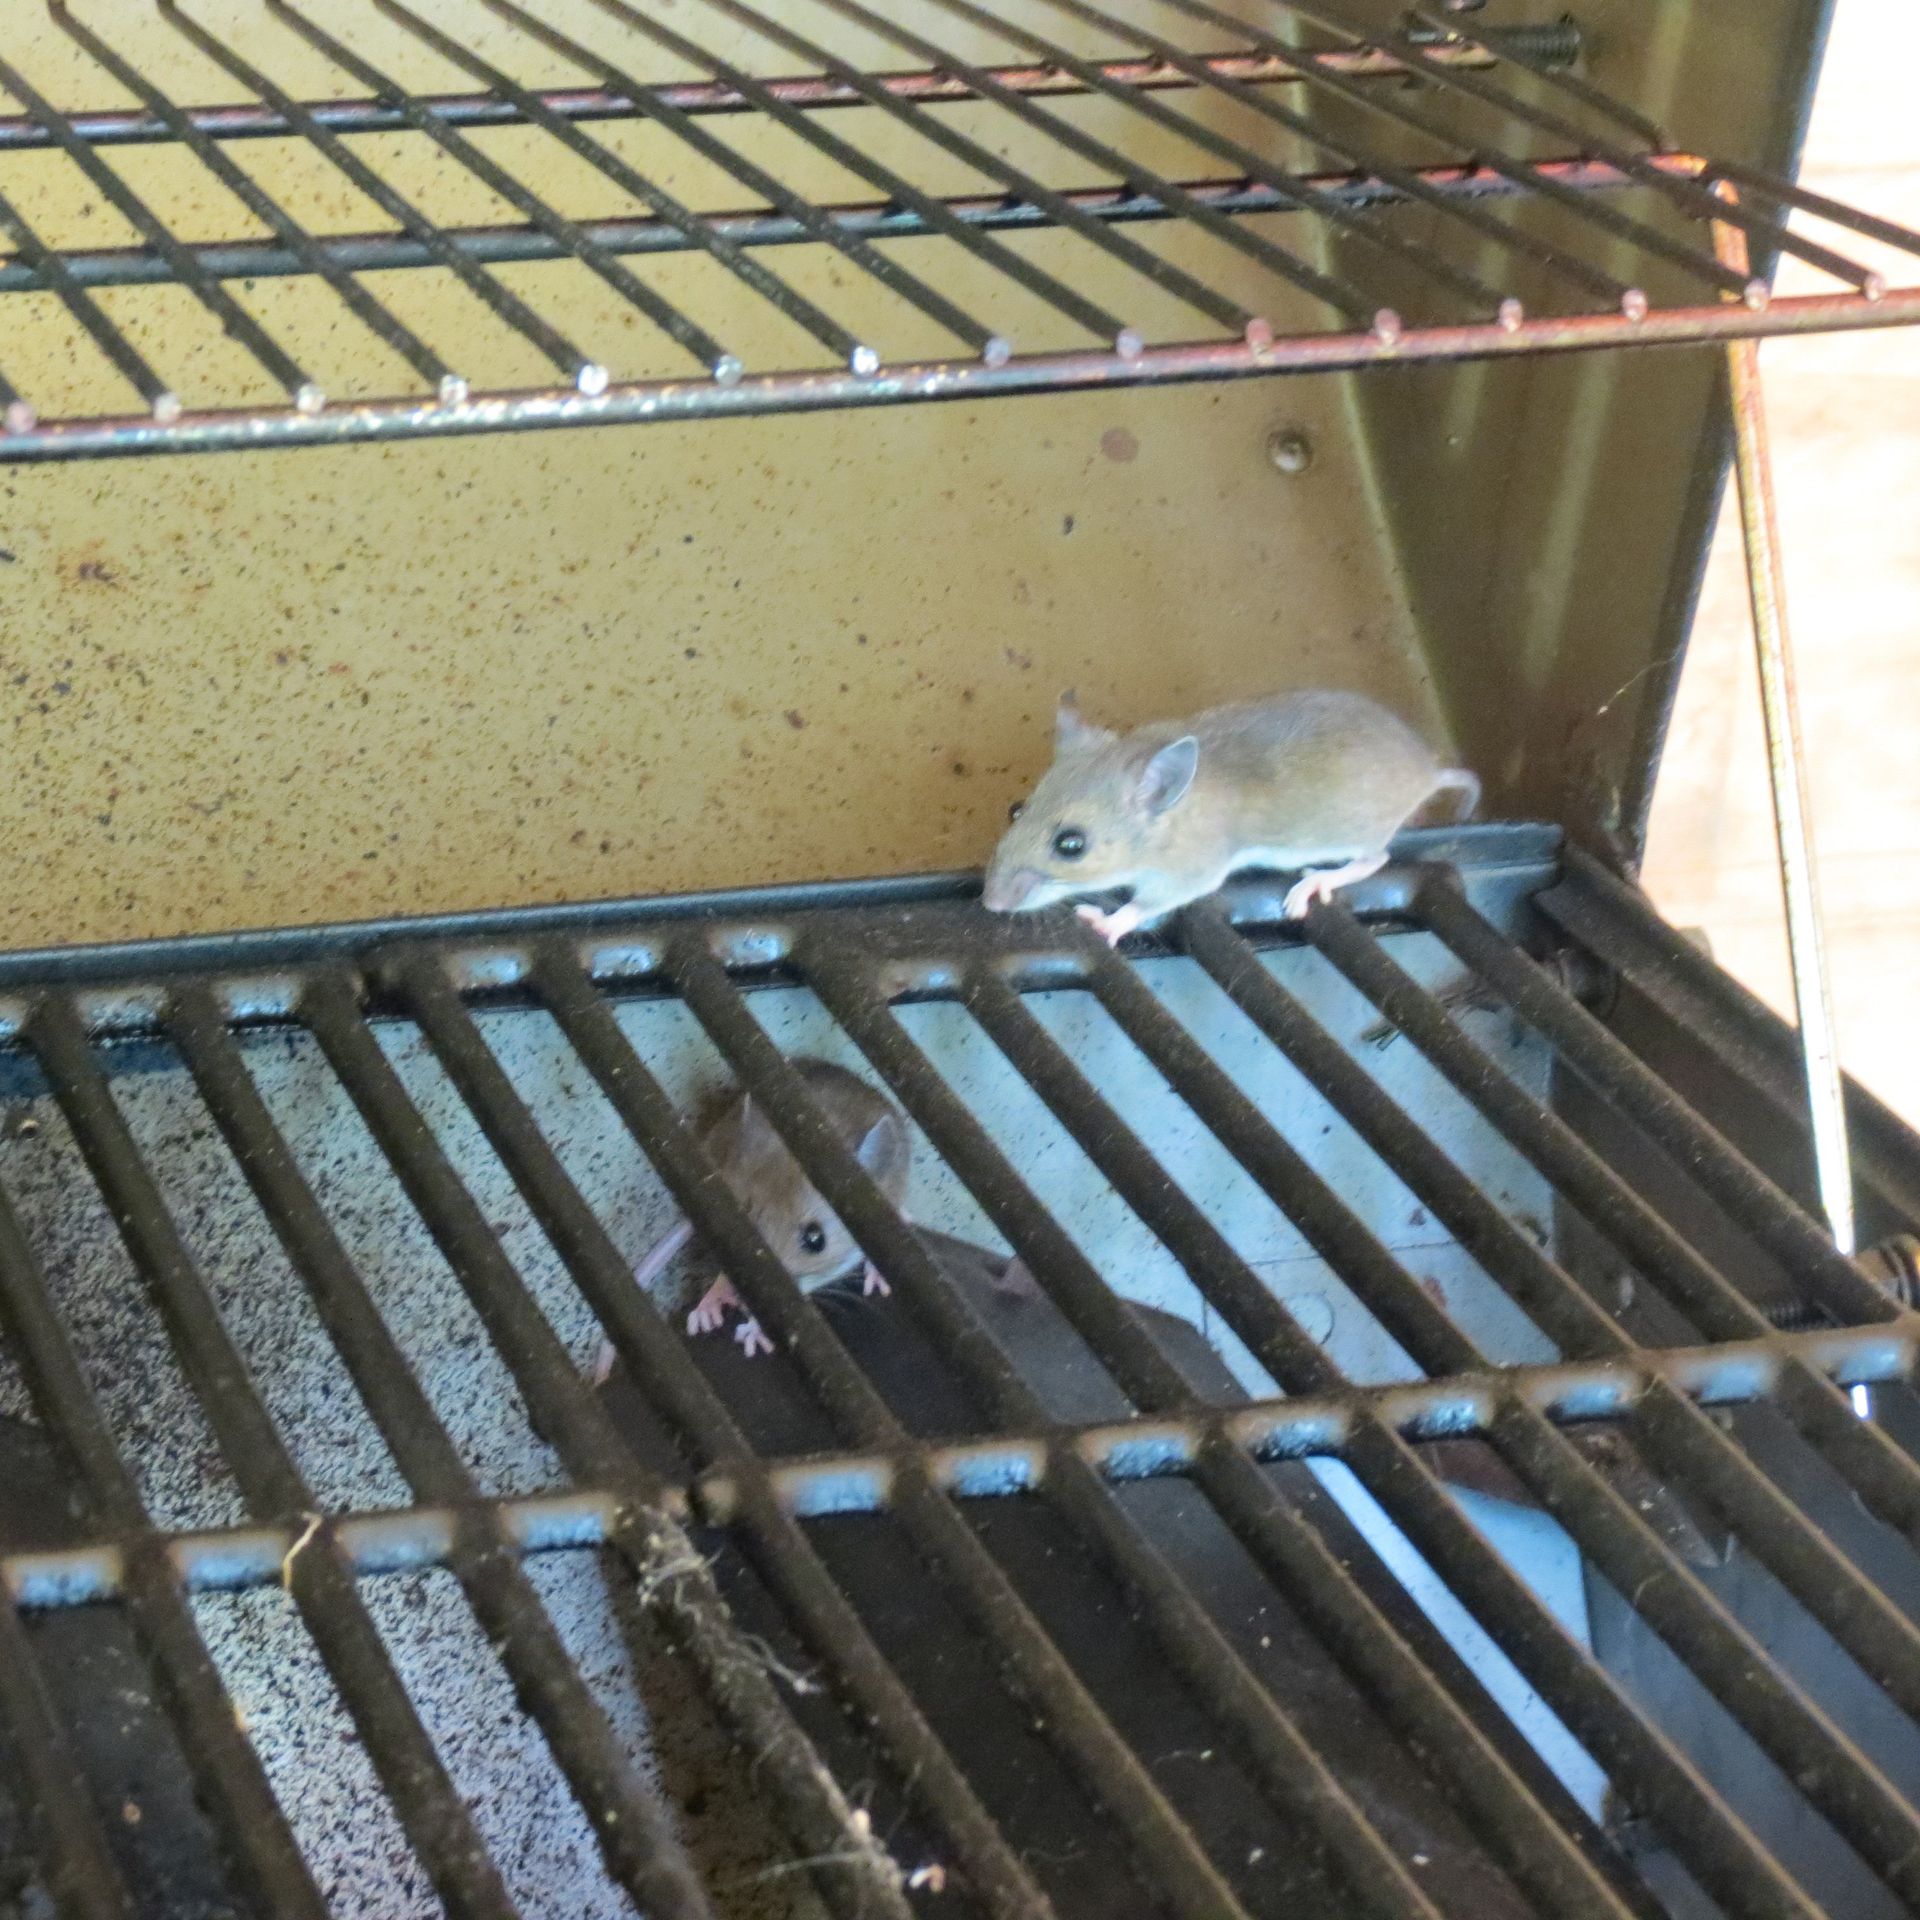 Keeping Mice Out of Your Home